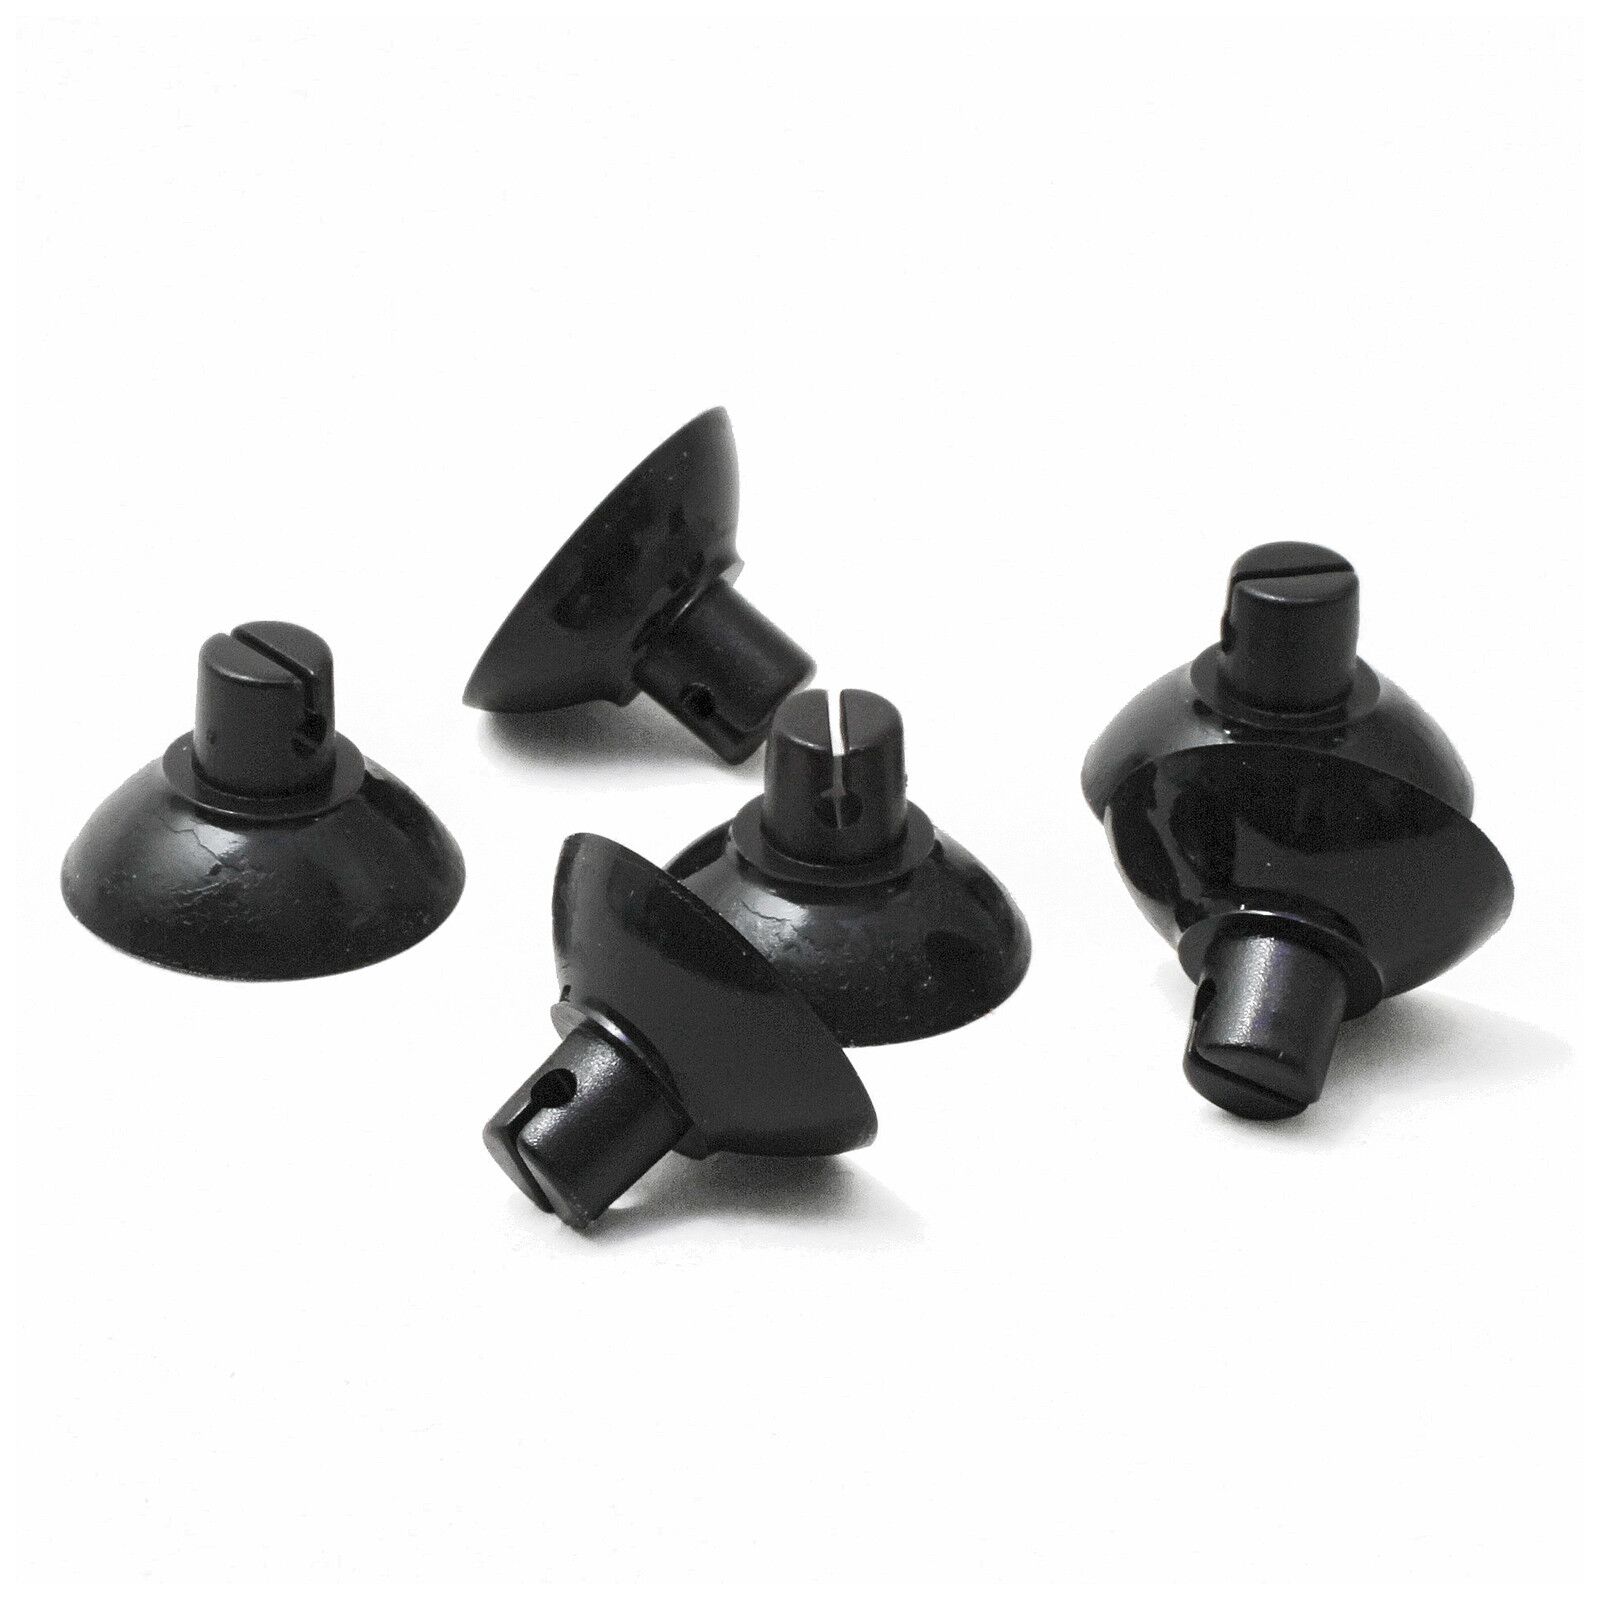 JBL - Slit suction cup for heat cables and temperature sensor - 6x